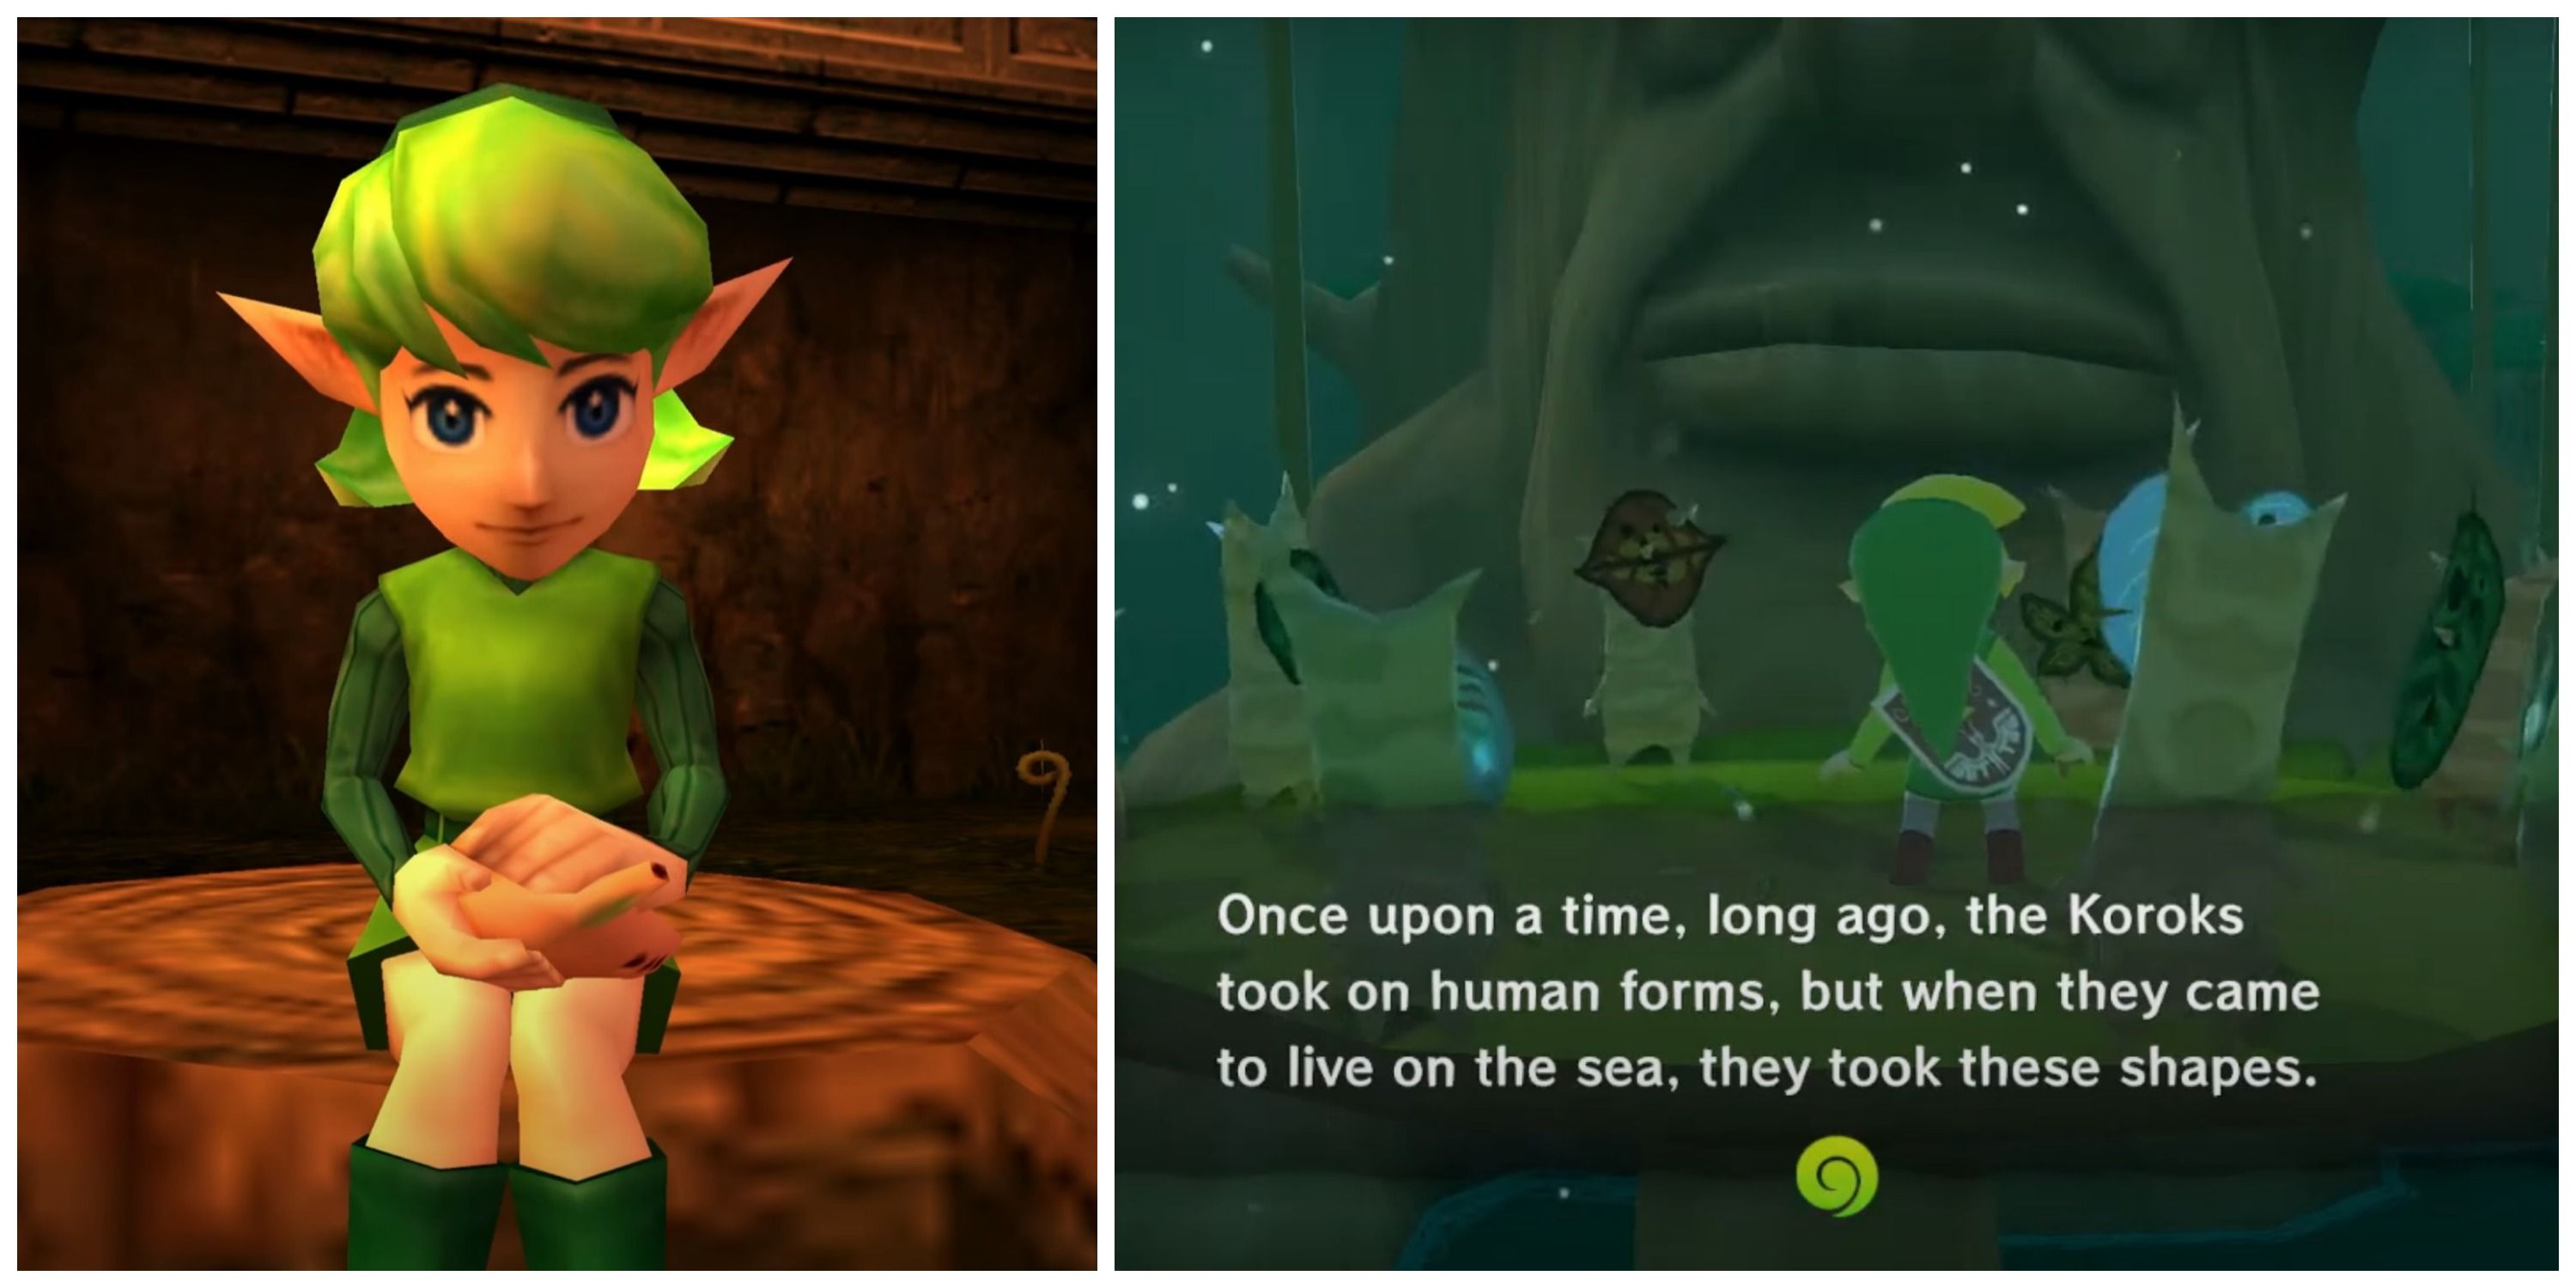 A split image showing Kokiri on the left and Toon Link speaking with Koroks on the right.